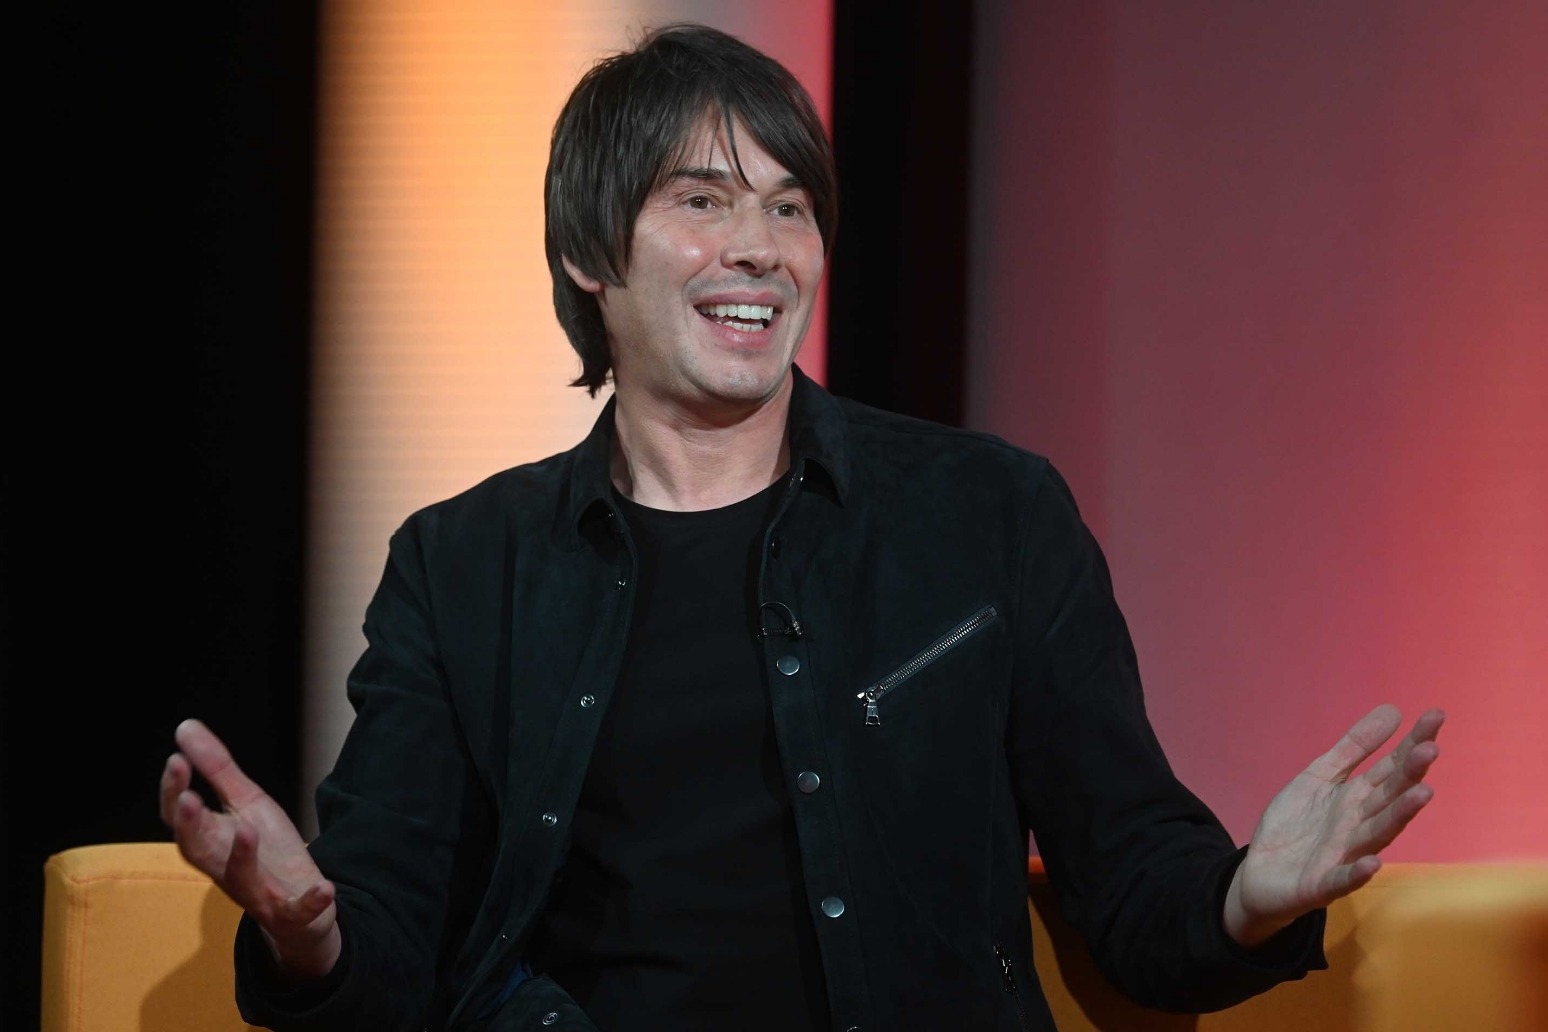 Professor Brian Cox sets new Guinness World Record with science tour 